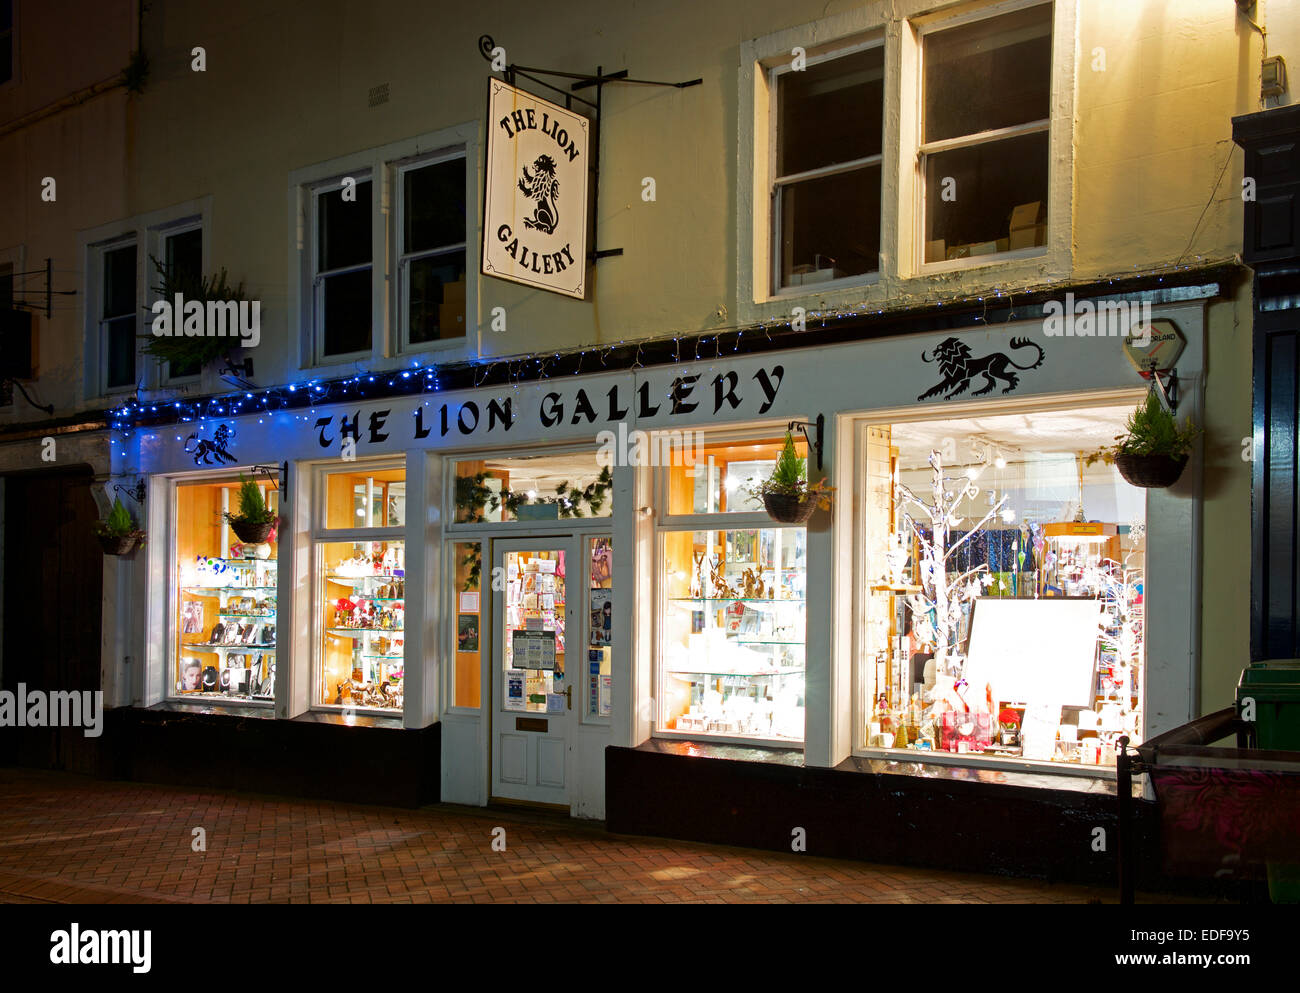 The Lion Gallery in Penrith, Cumbria, England UK Stock Photo